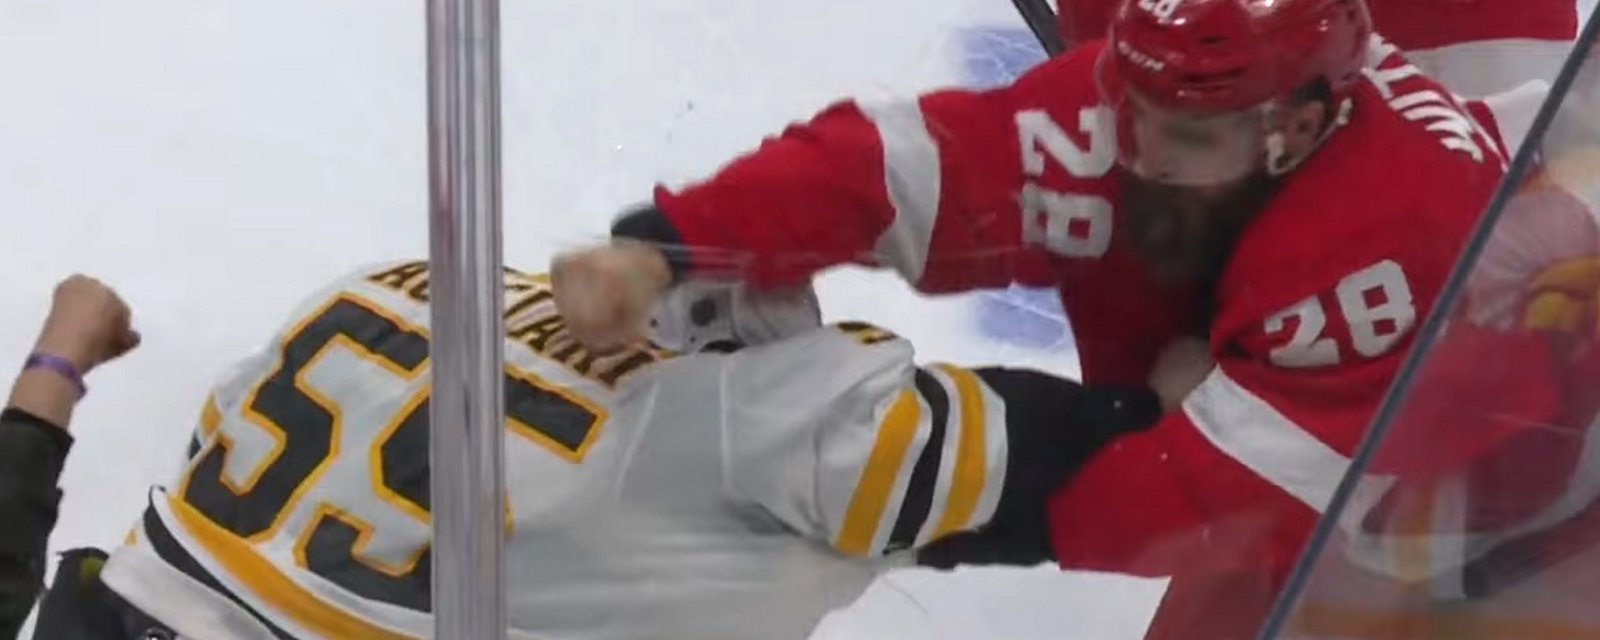 Luke Witkowski crushes Nordstrom with a monster hit, then destroys Acciari with his fists.